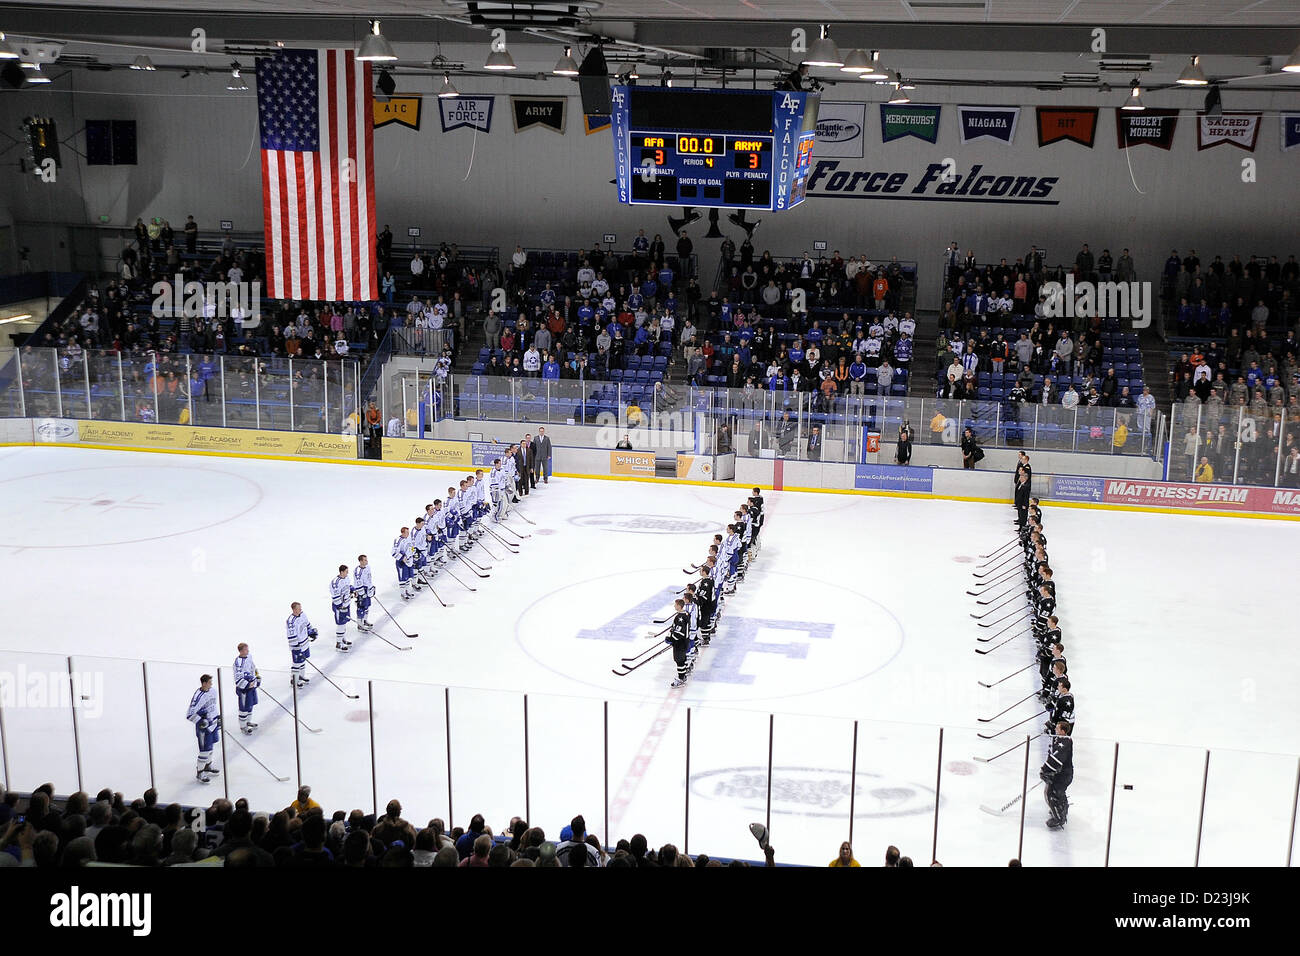 Air Force and Army seniors form up on center ice during the playing of the school Alma Maters after skating to a 3-3 tie at the U.S. Air Force Academy's Cadet Ice Arena Jan 12, 2013 in Colorado Springs, Colo.   Air Force defeated Army the night before, 4-1. (Air Force photo/Mike Kaplan) Stock Photo